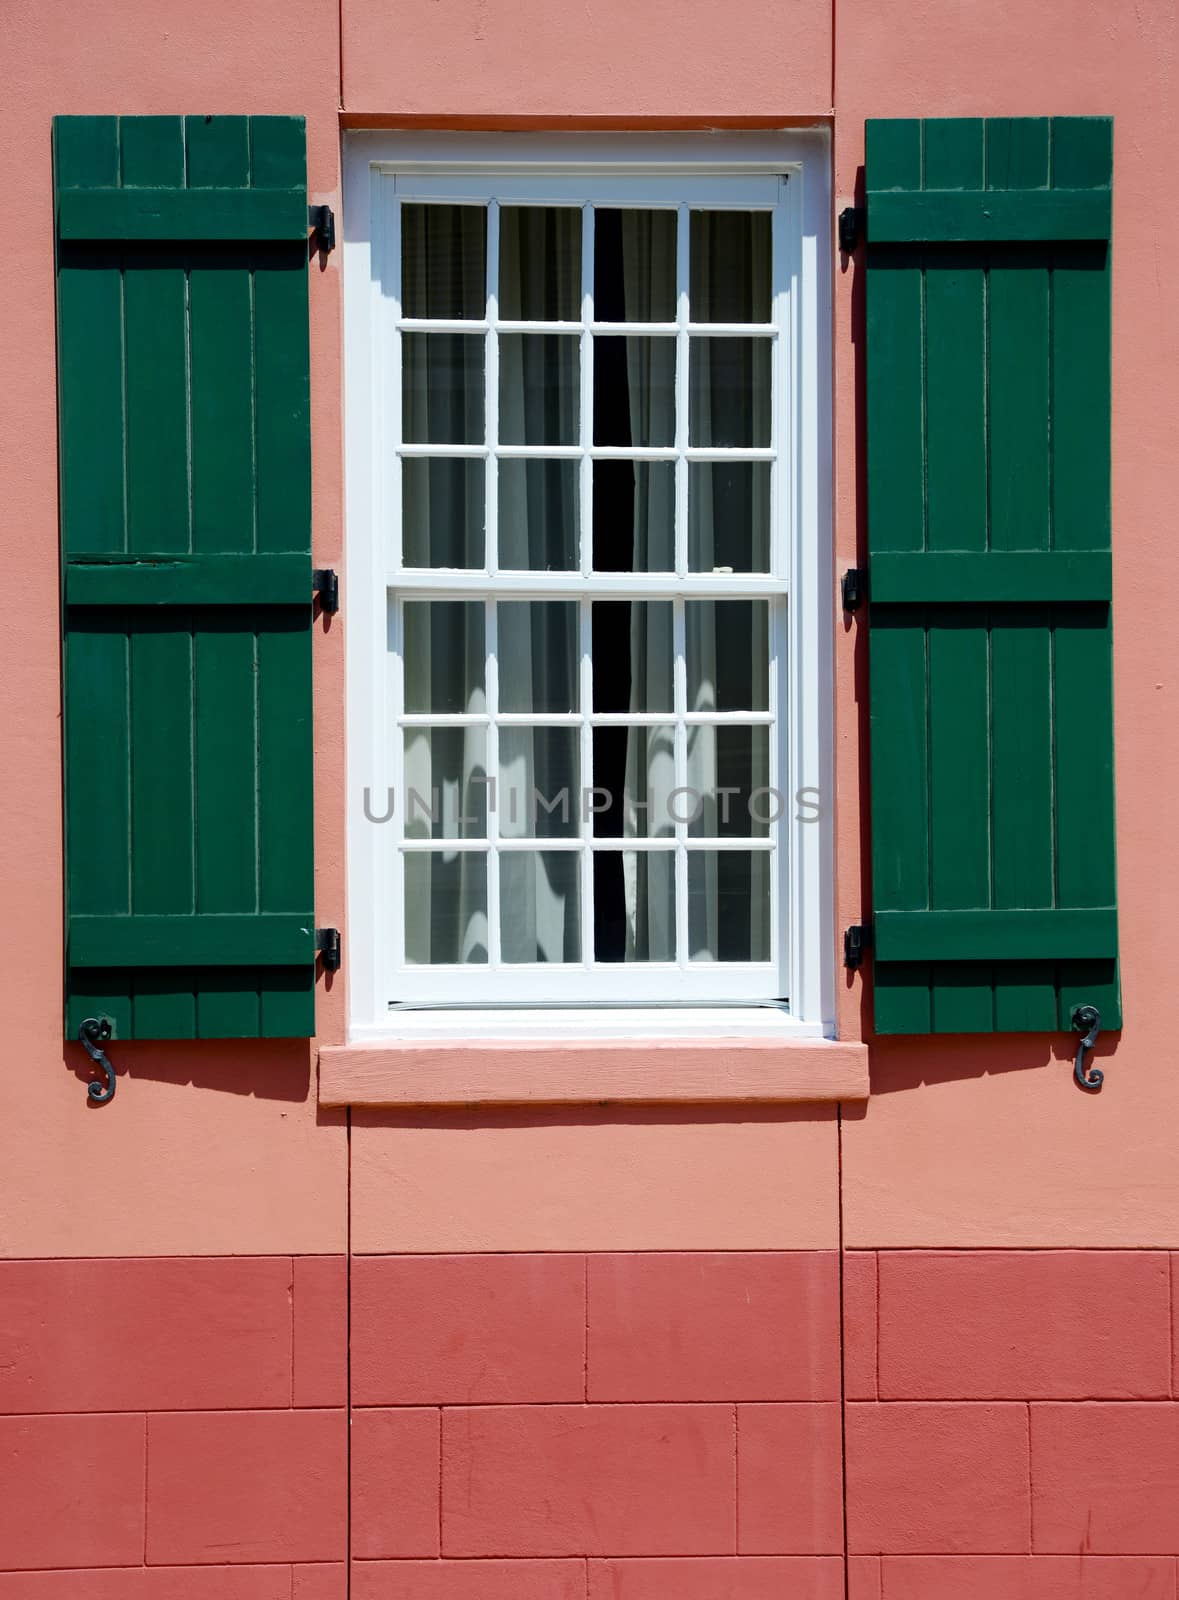 window and green shutters in european village by ftlaudgirl